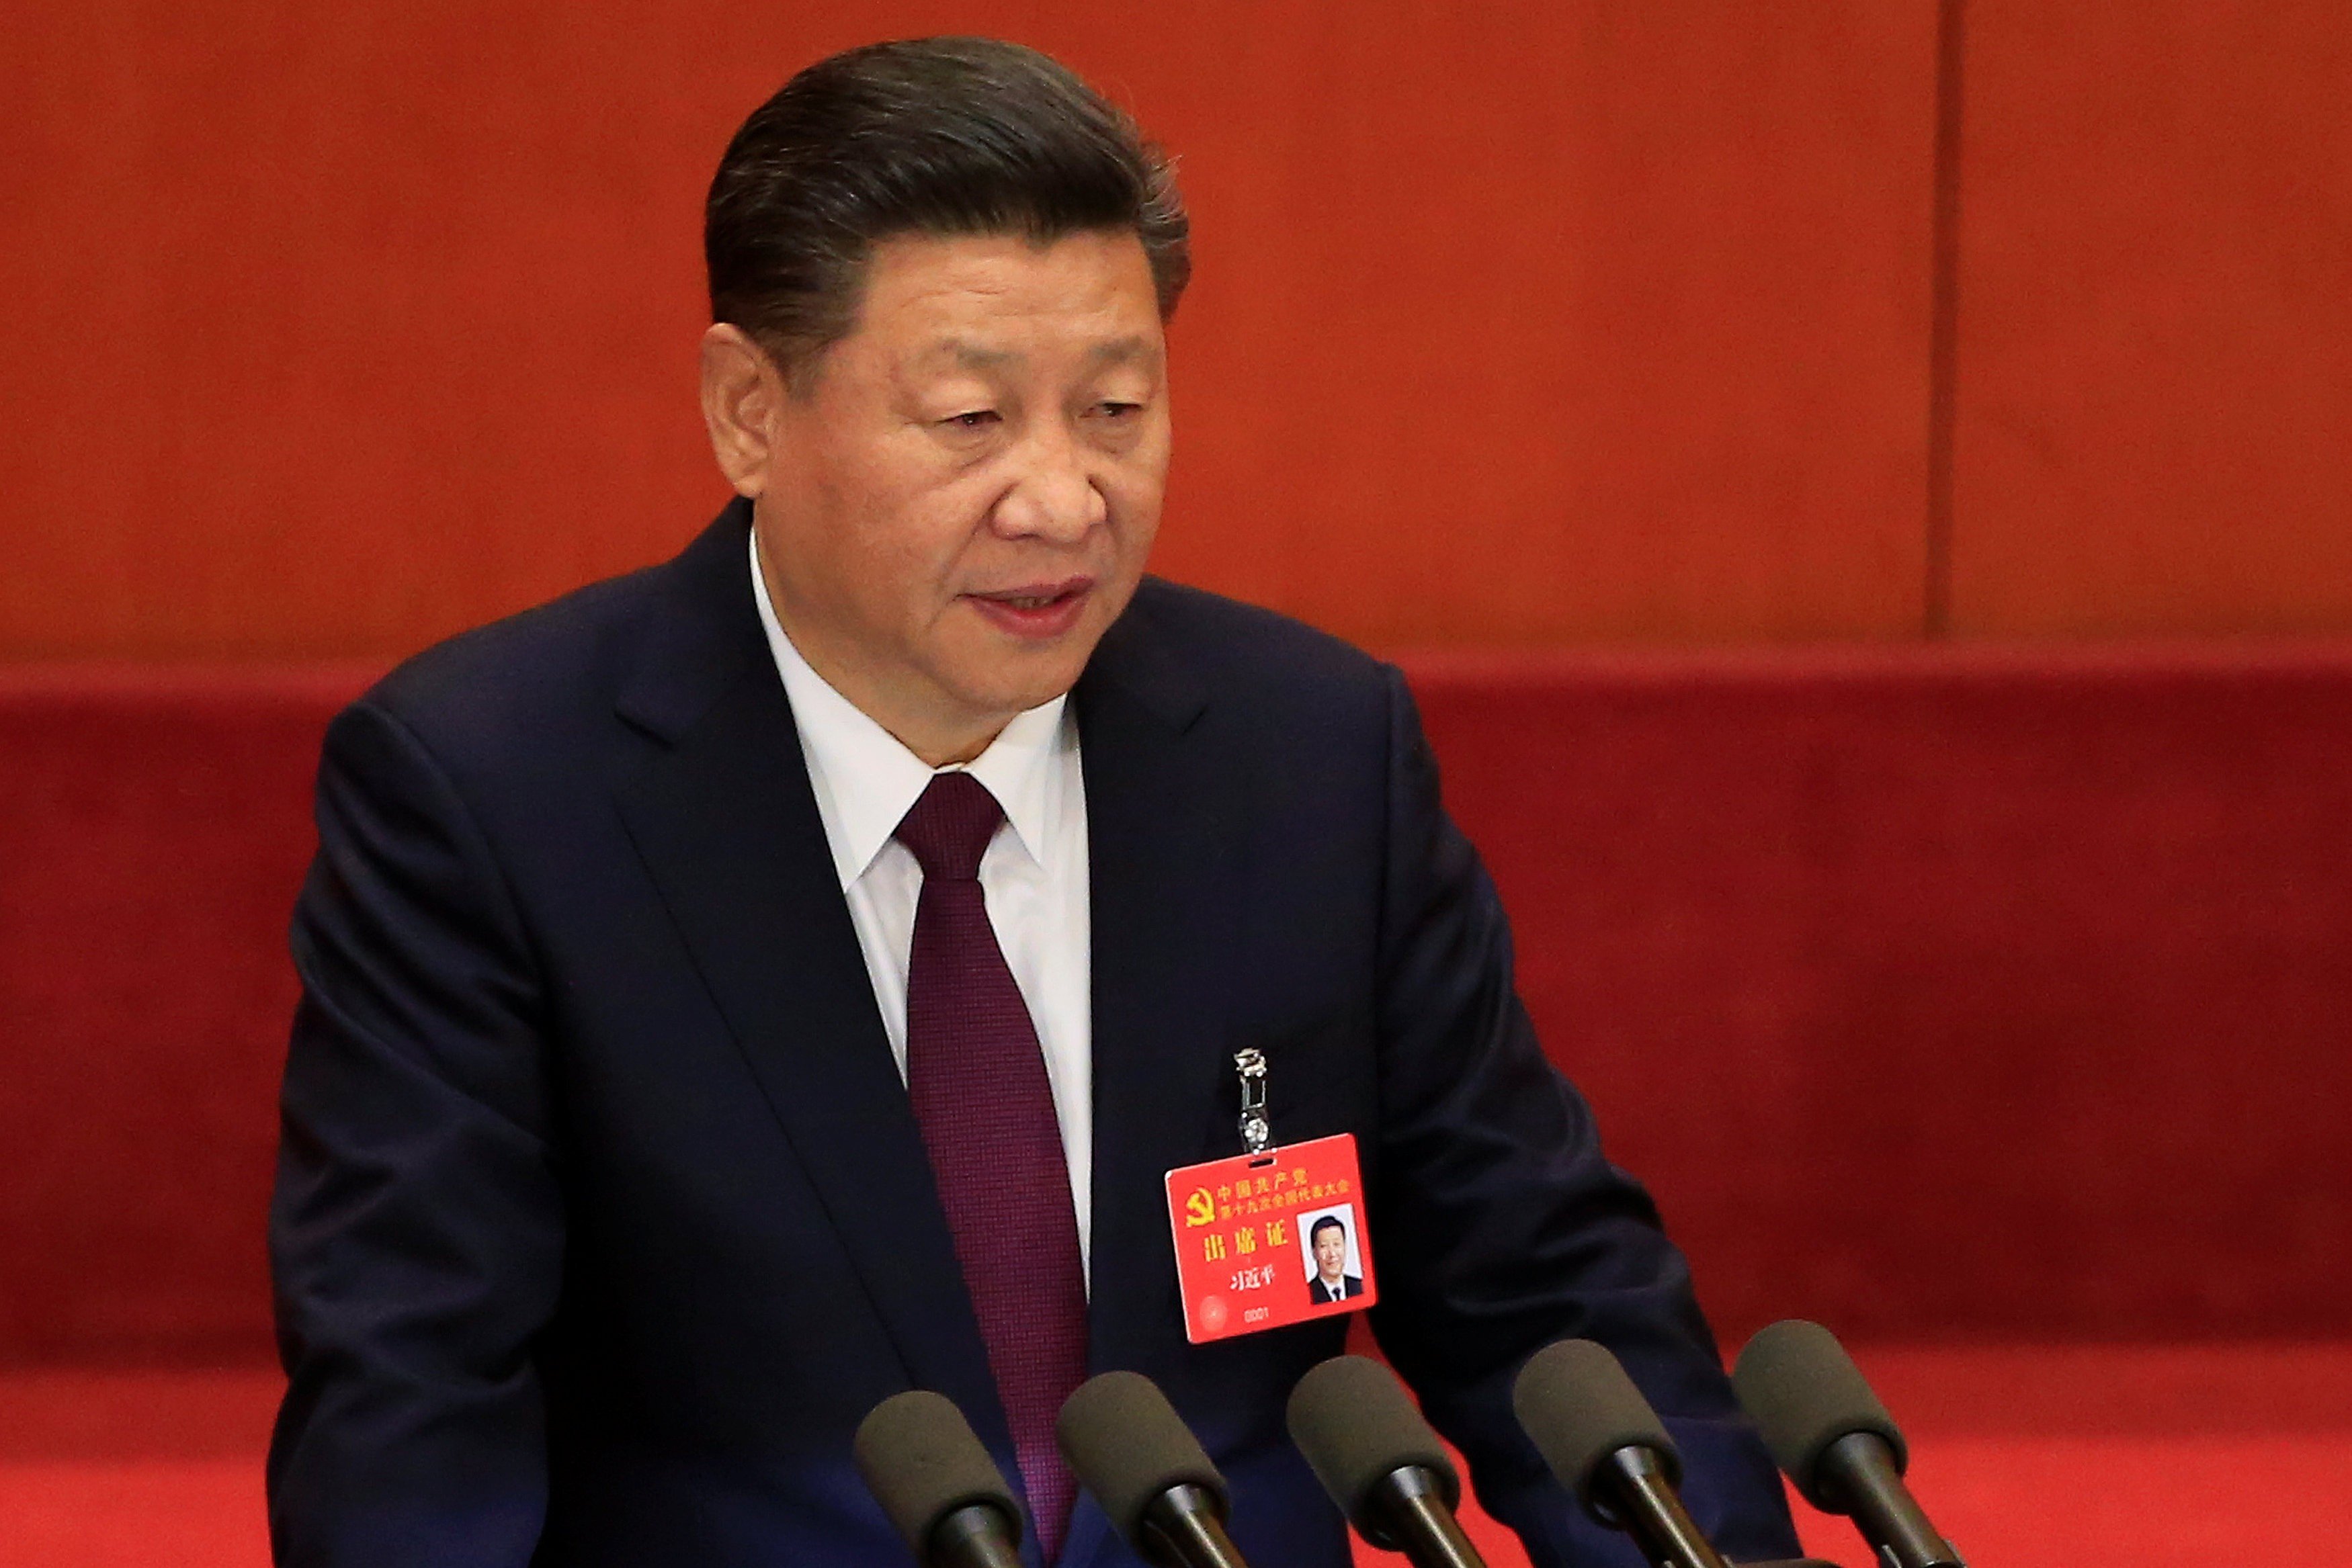 Chinese President Xi Jinping speaks during the opening of the 19th National Congress of the Communist Party of China at the Great Hall of the People in Beijing. Photo: Reuters